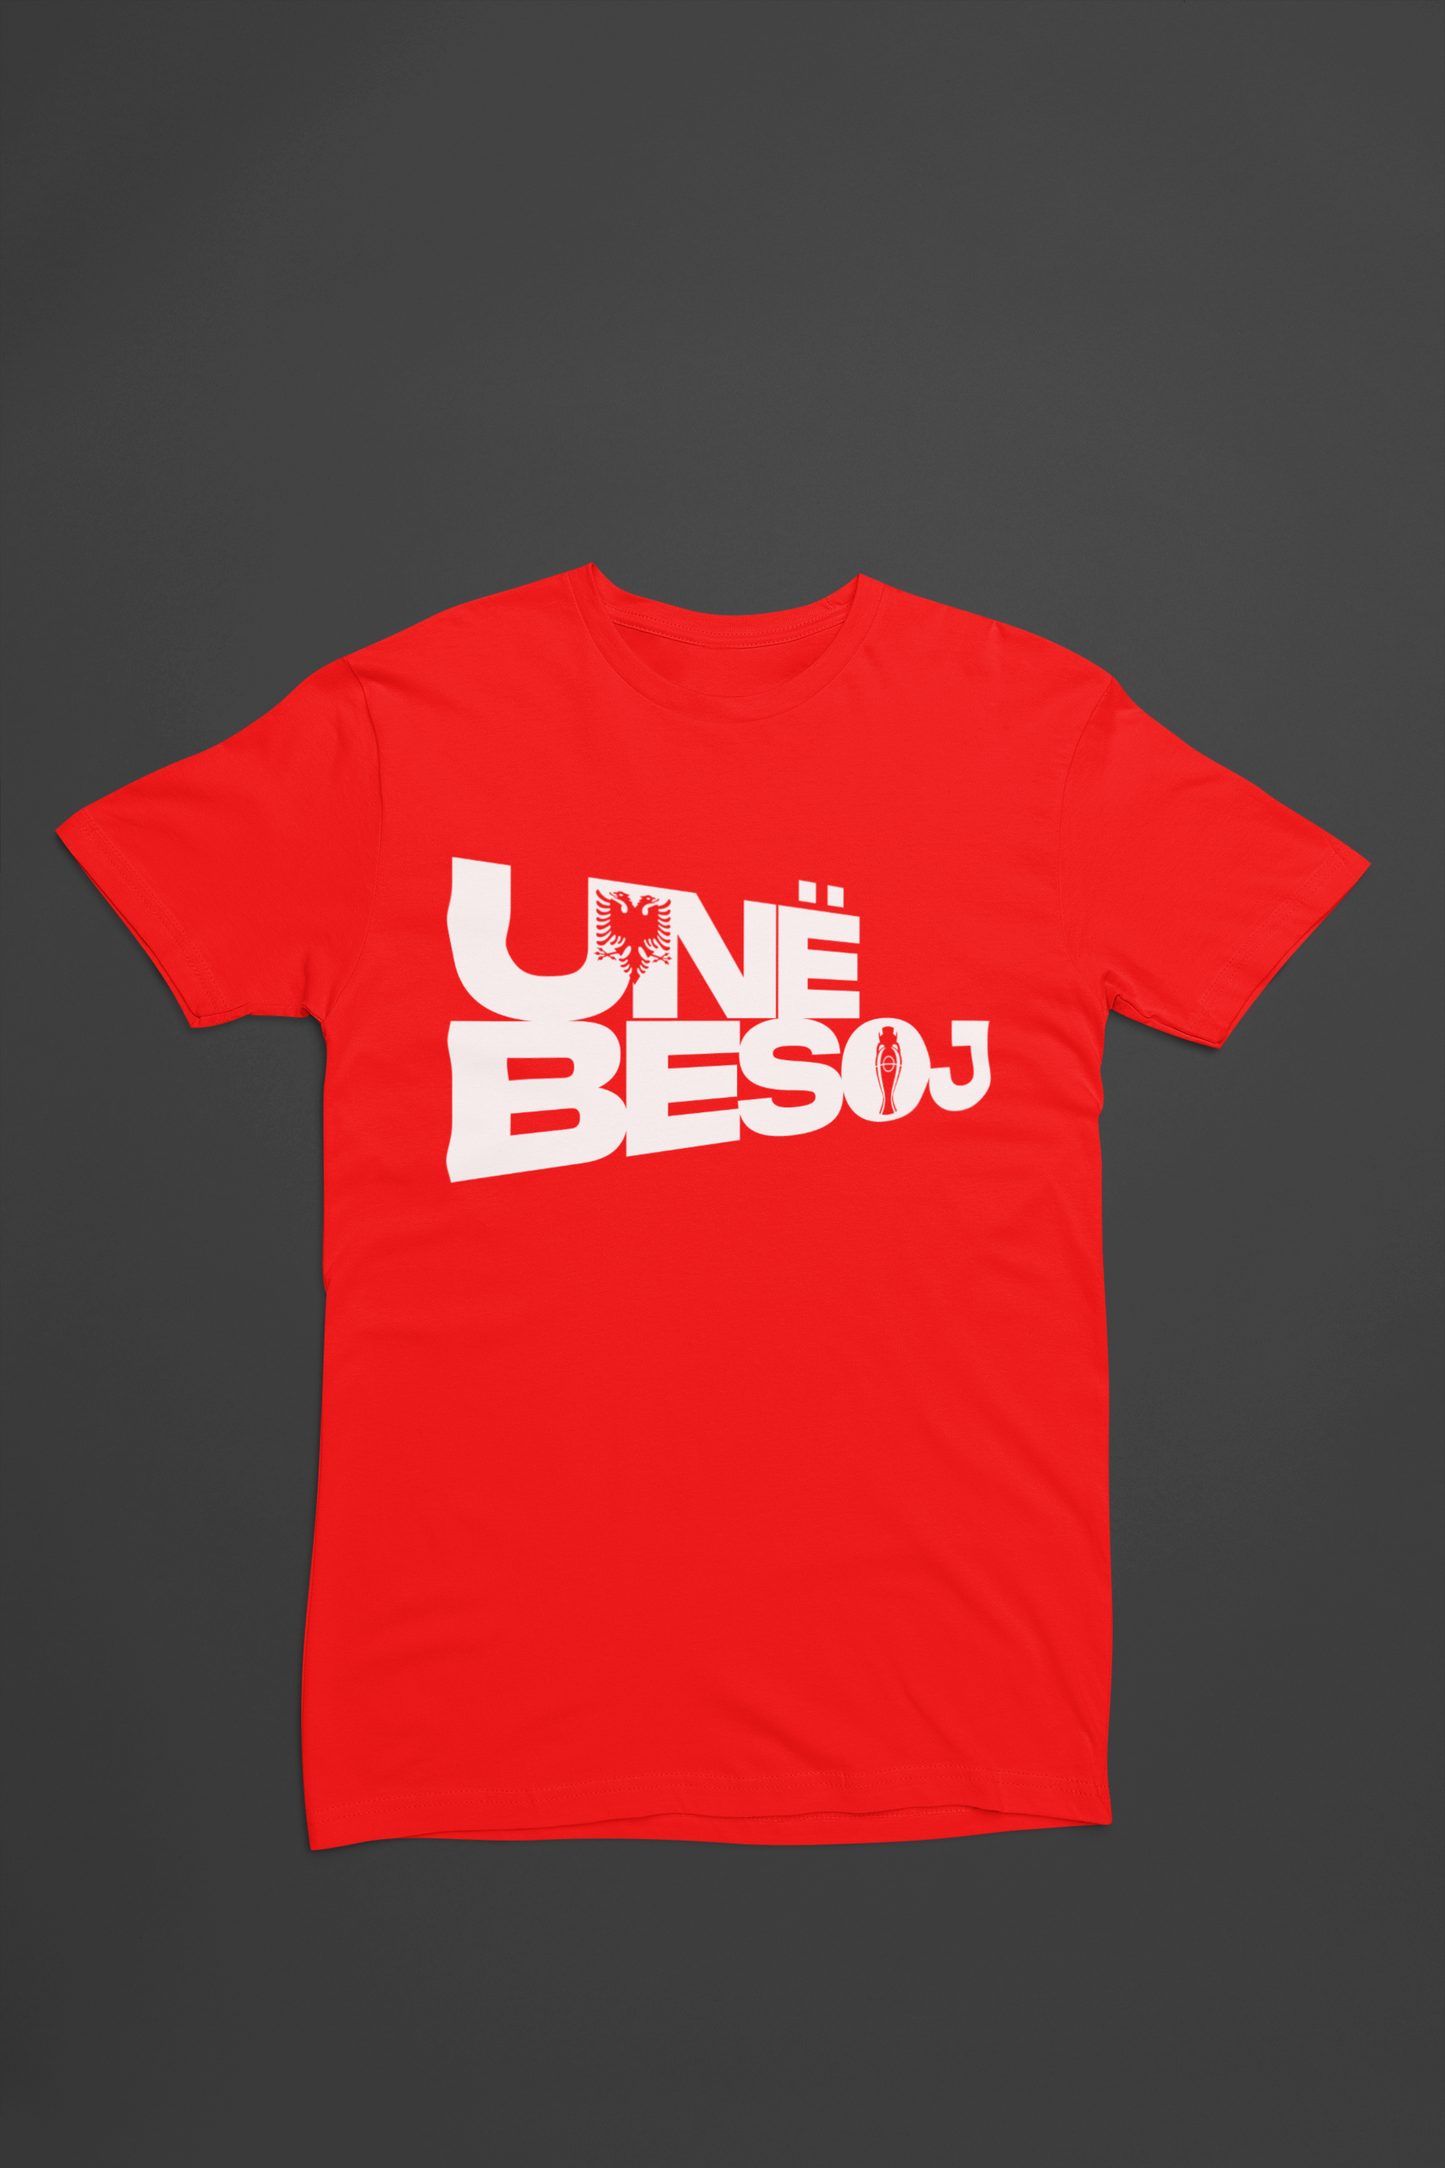 RED T-SHIRT FOR KIDS WITH TYPOGRAPHY